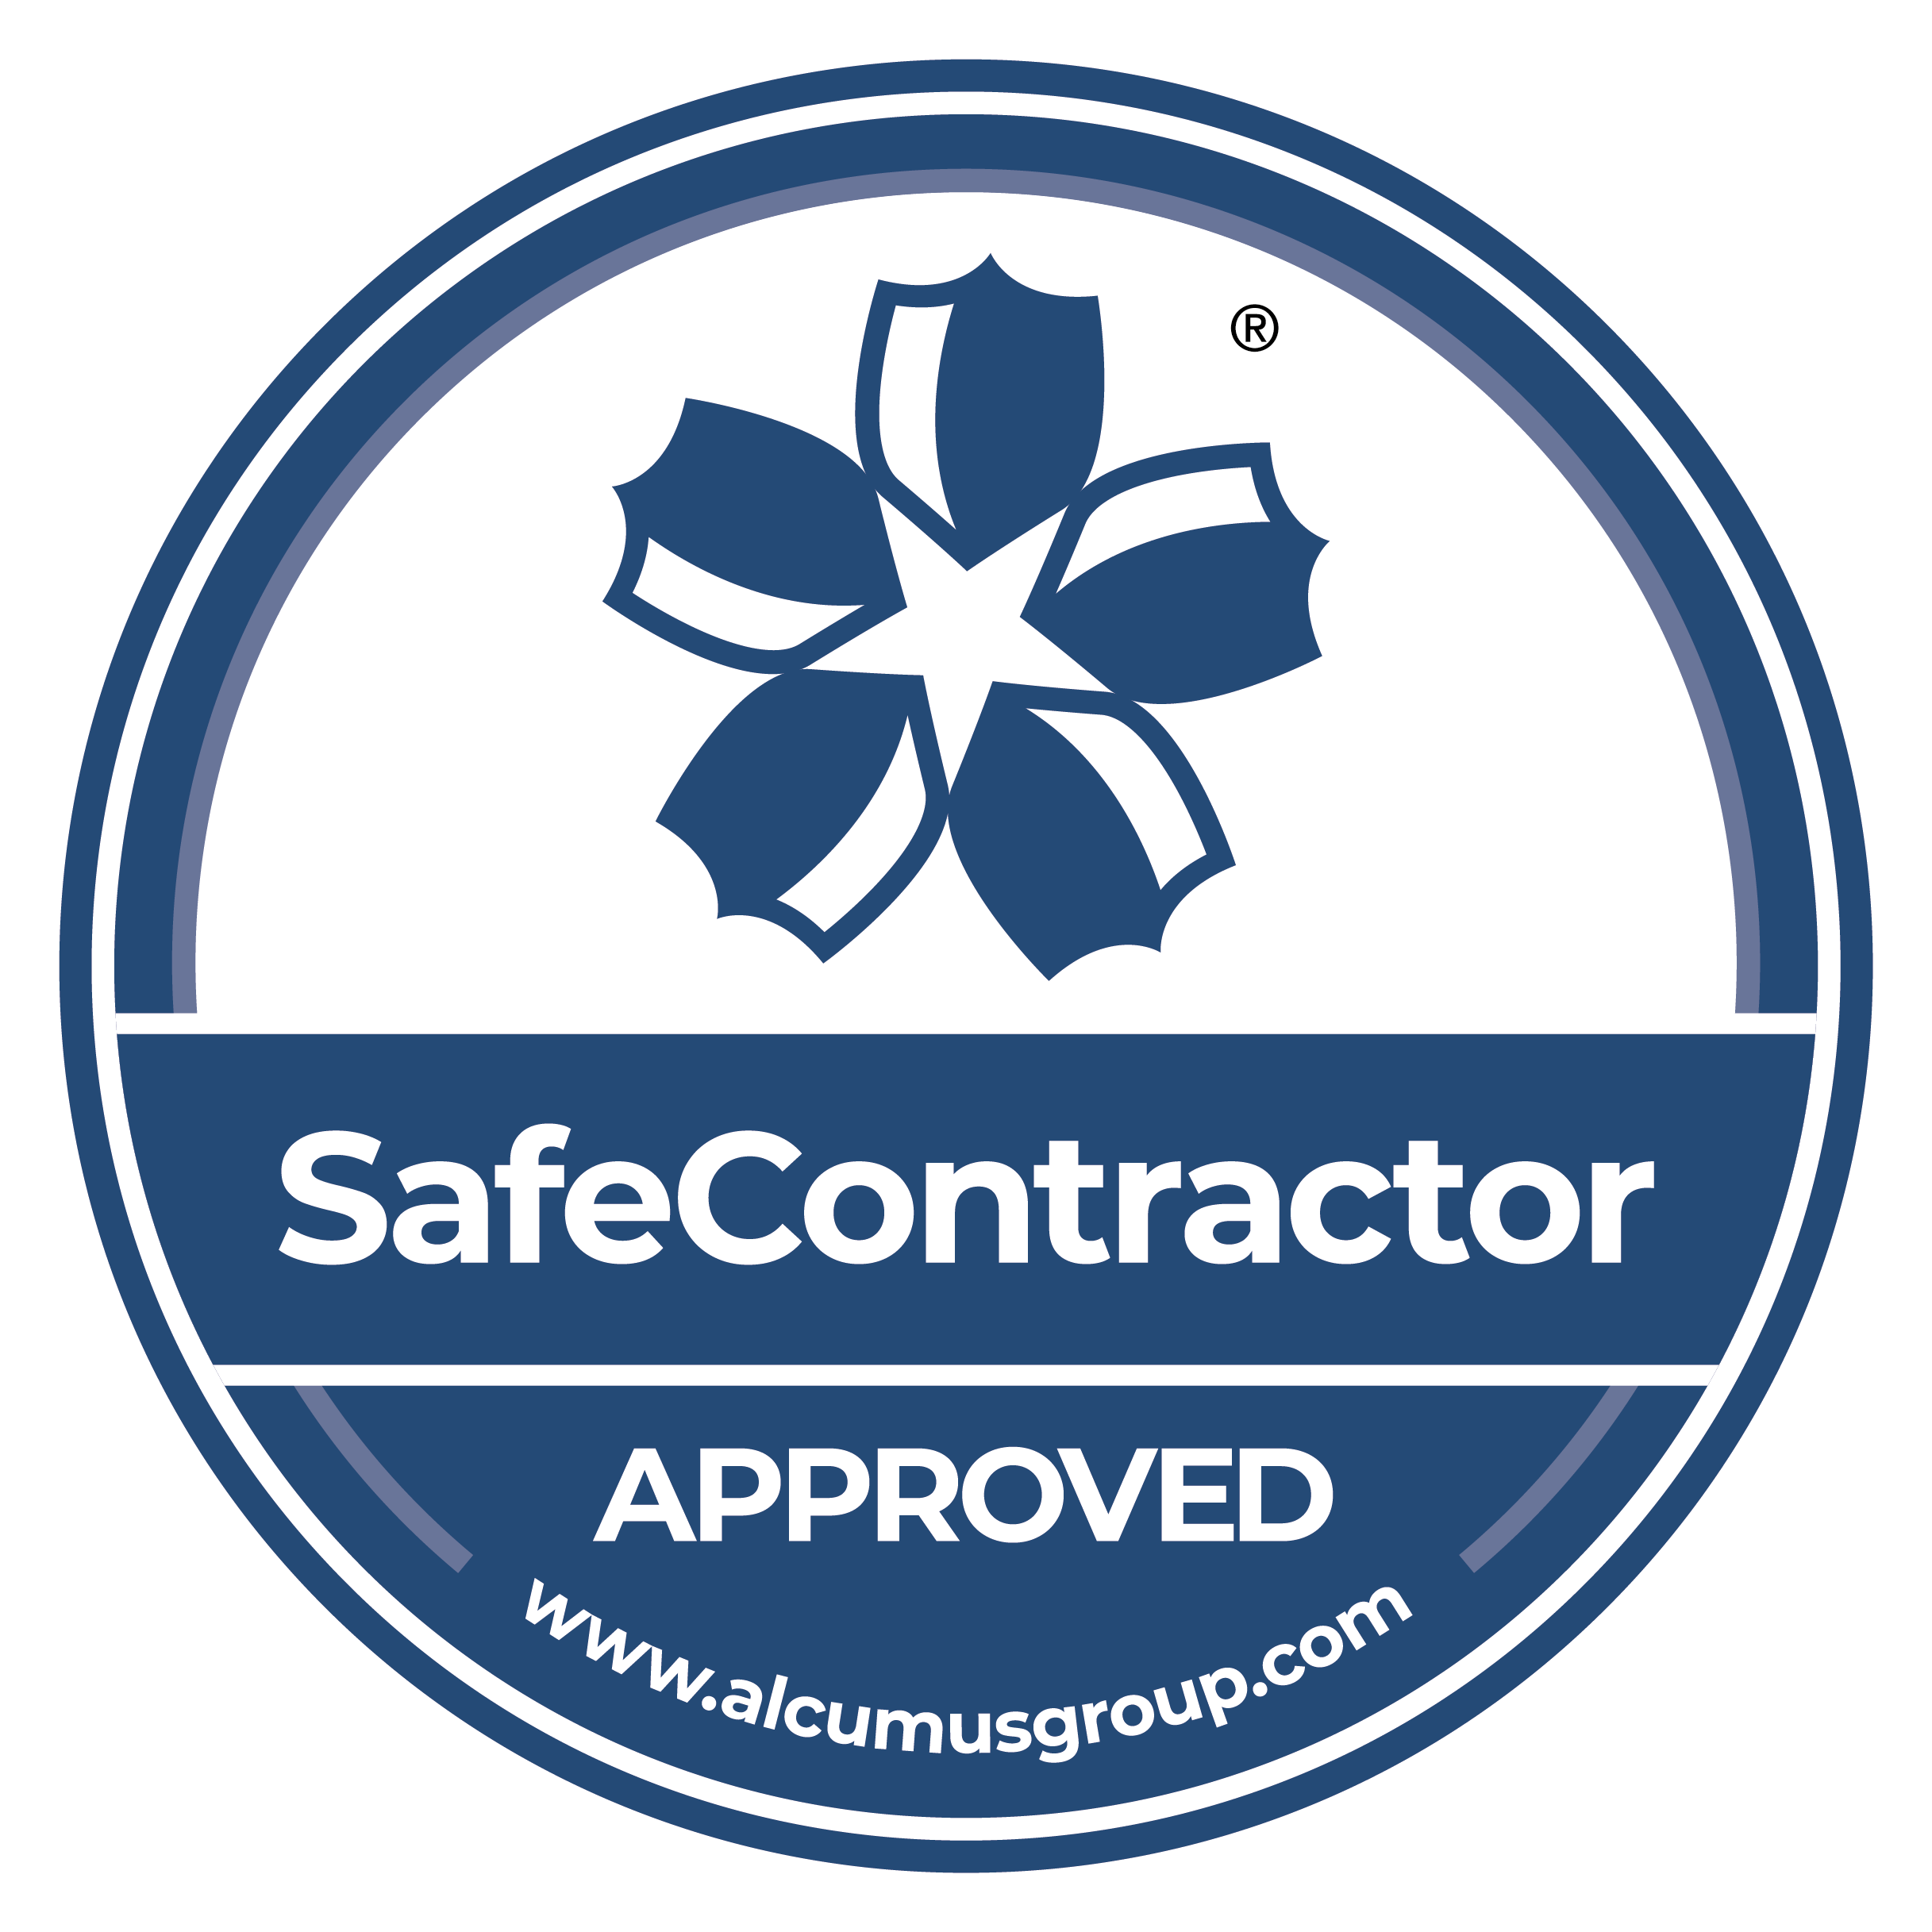 Alcumus approved safe contractor